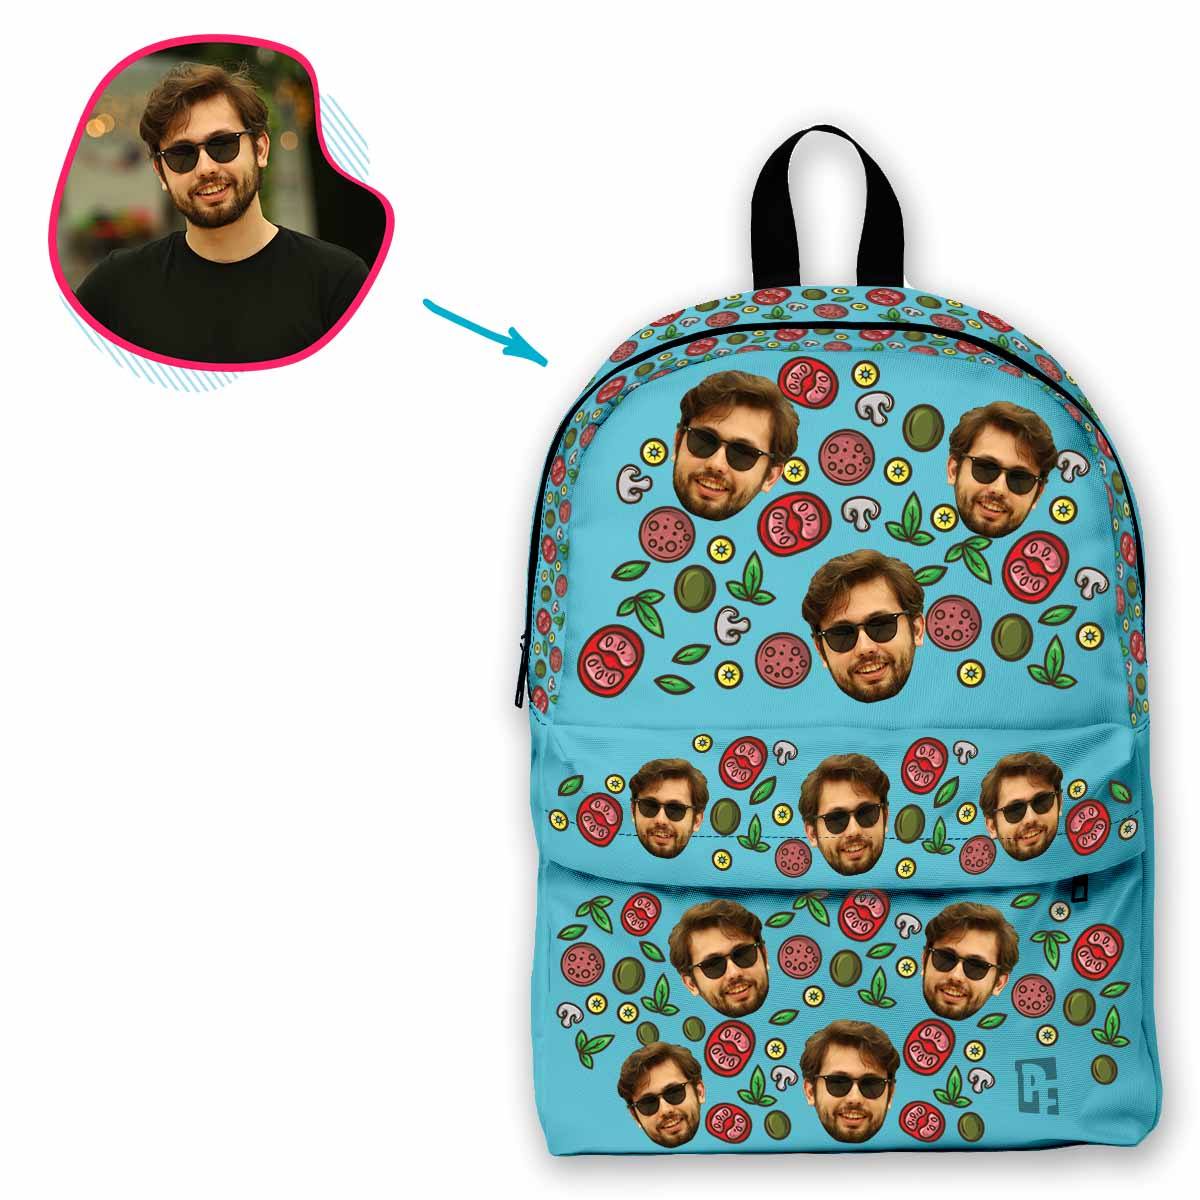 blue Pizza classic backpack personalized with photo of face printed on it